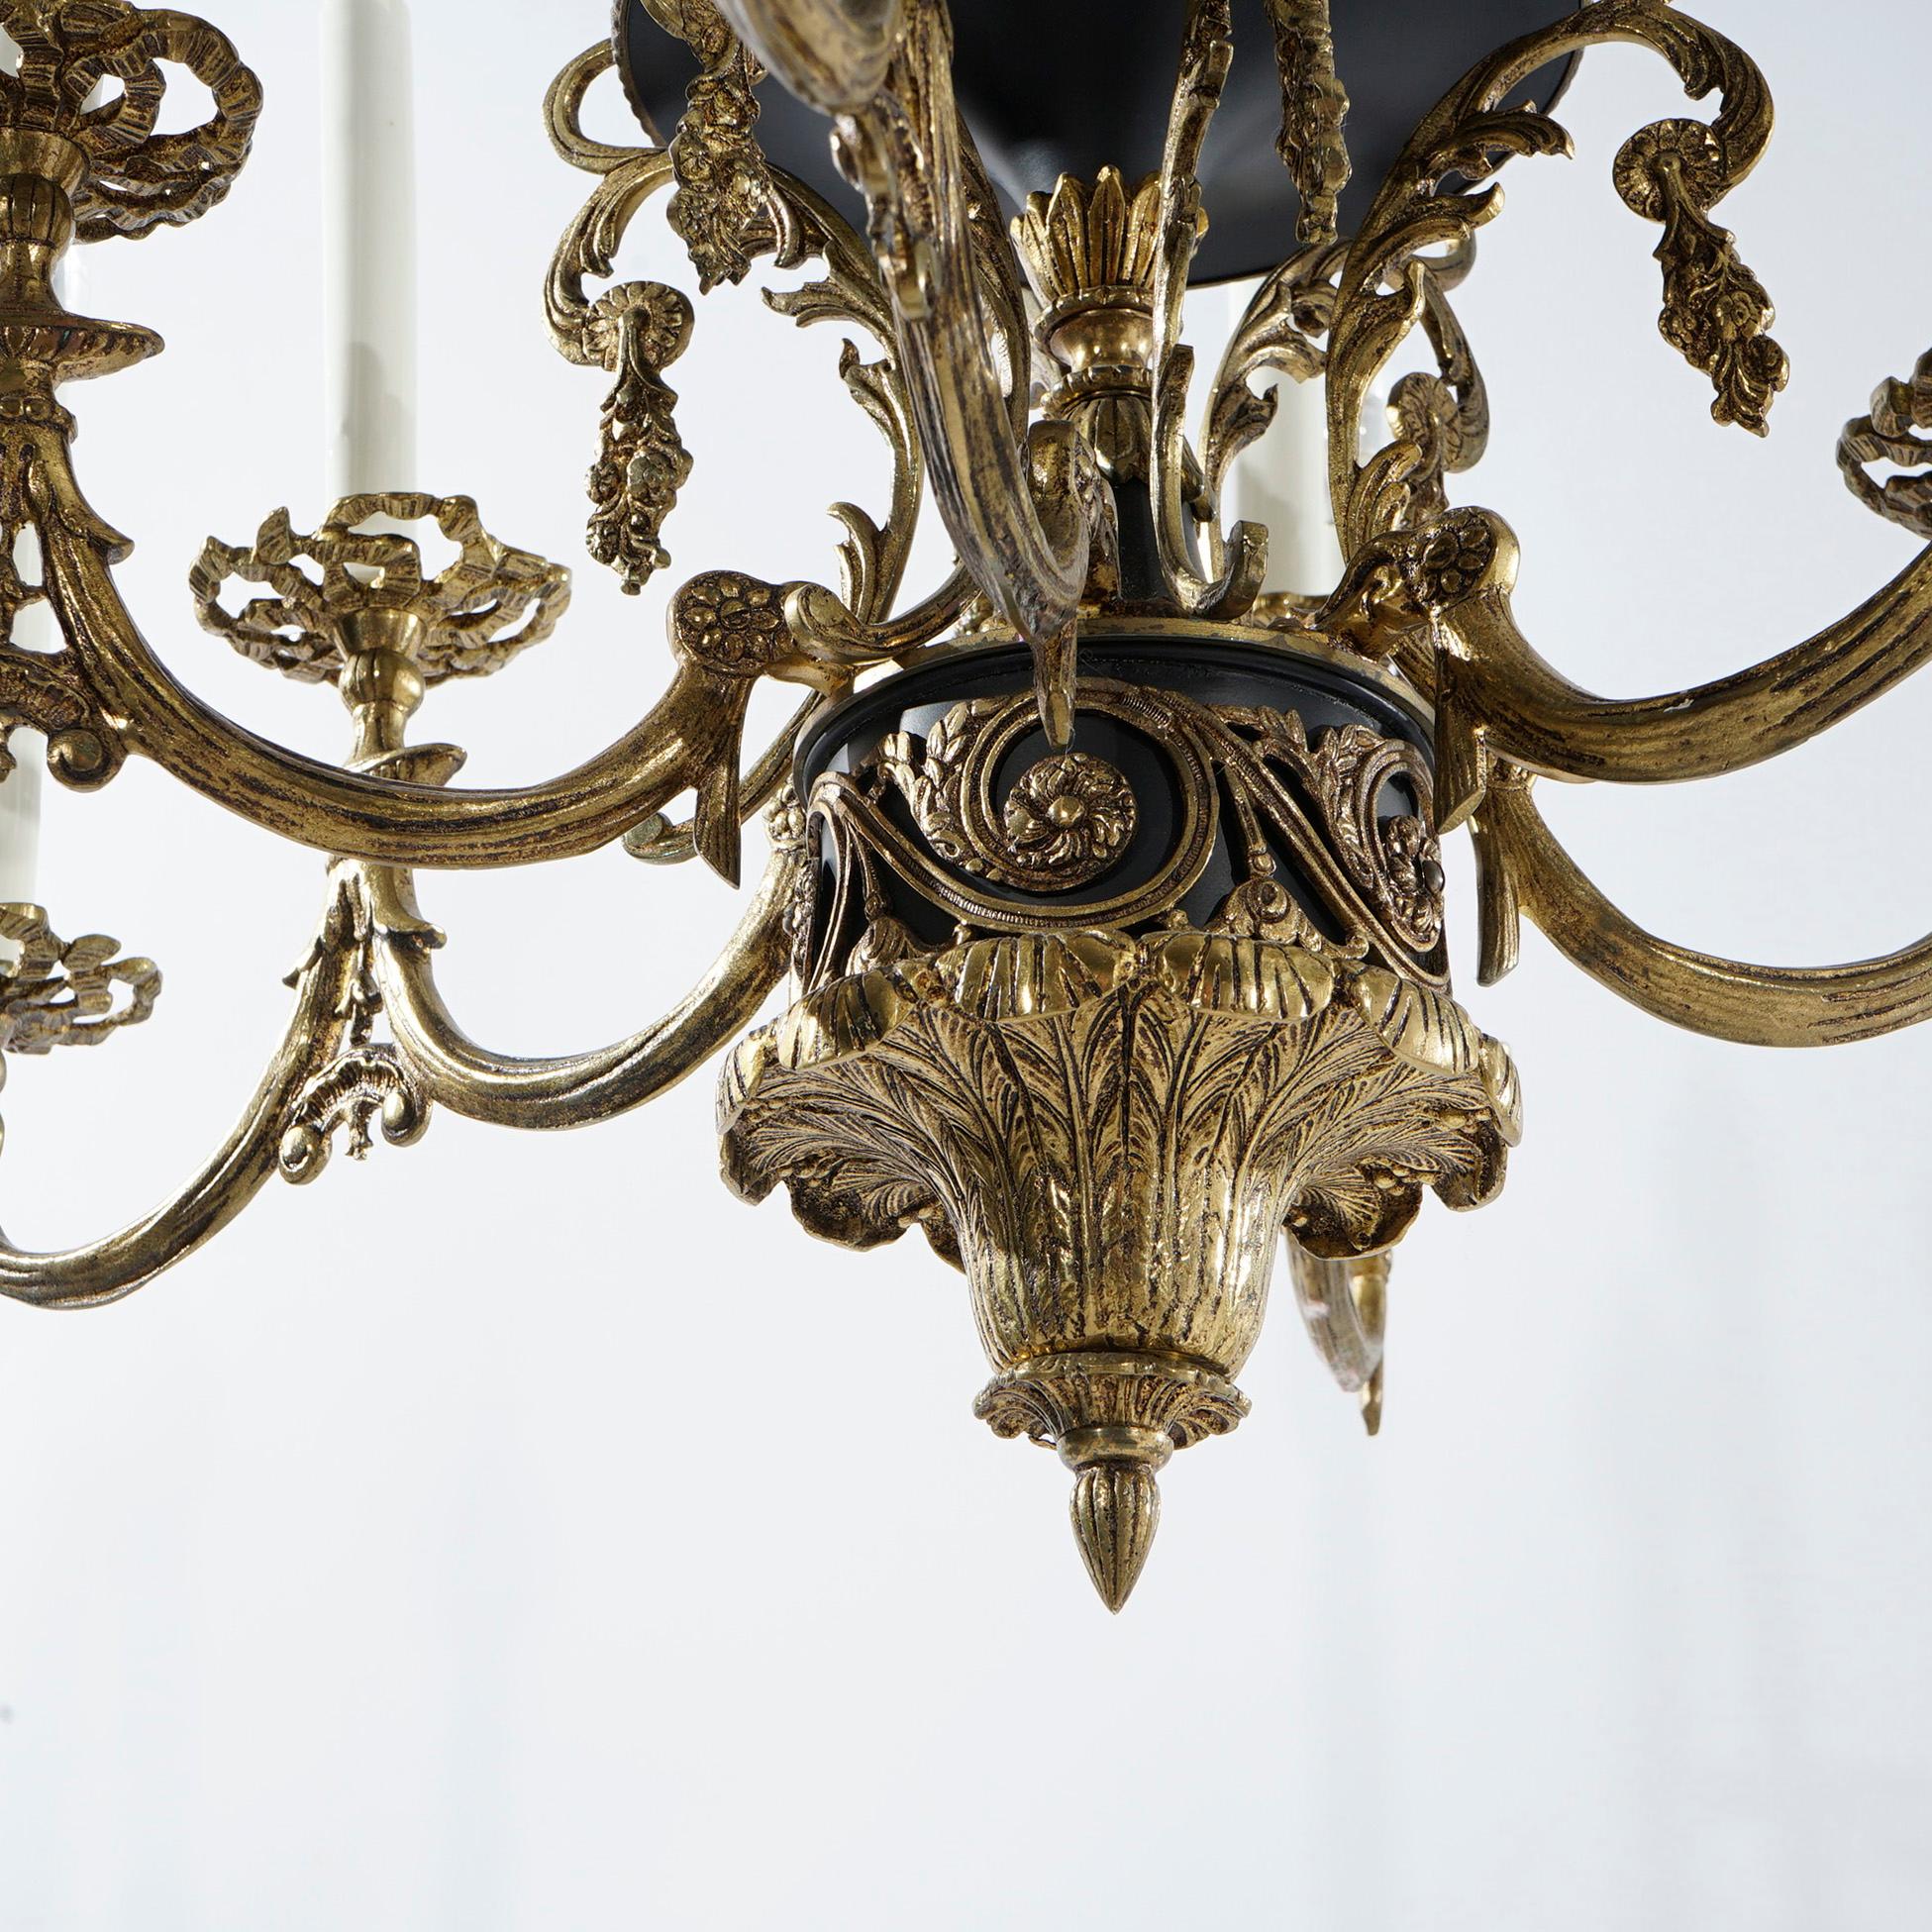 Antique French Empire Style Ebonized Bronze Twelve-Light Chandelier, Early 20thC For Sale 11